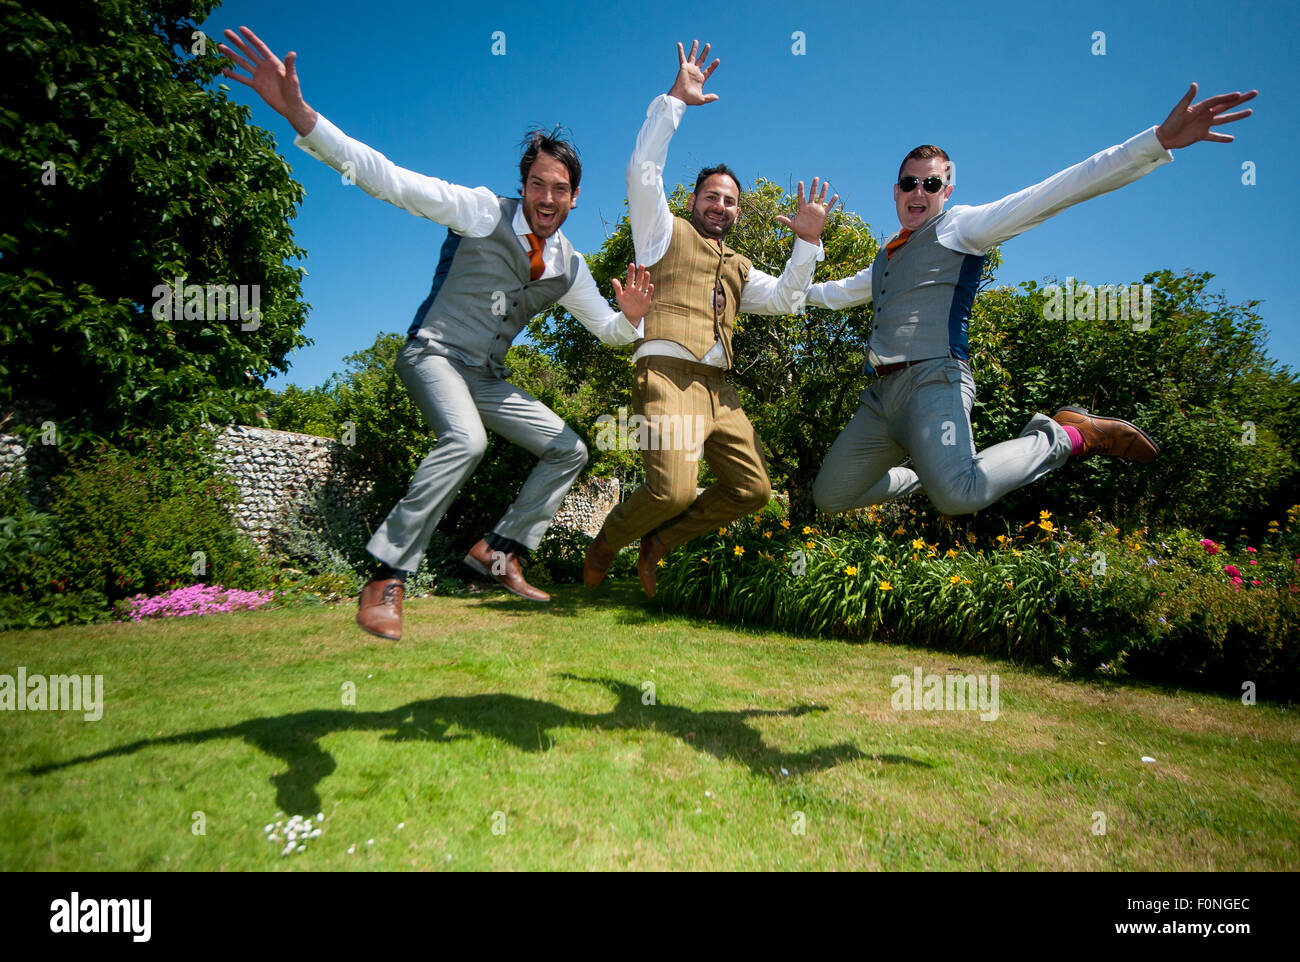 A groom and his 2 best men jump up in the air in excitement prior to the wedding ceremony. Stock Photo